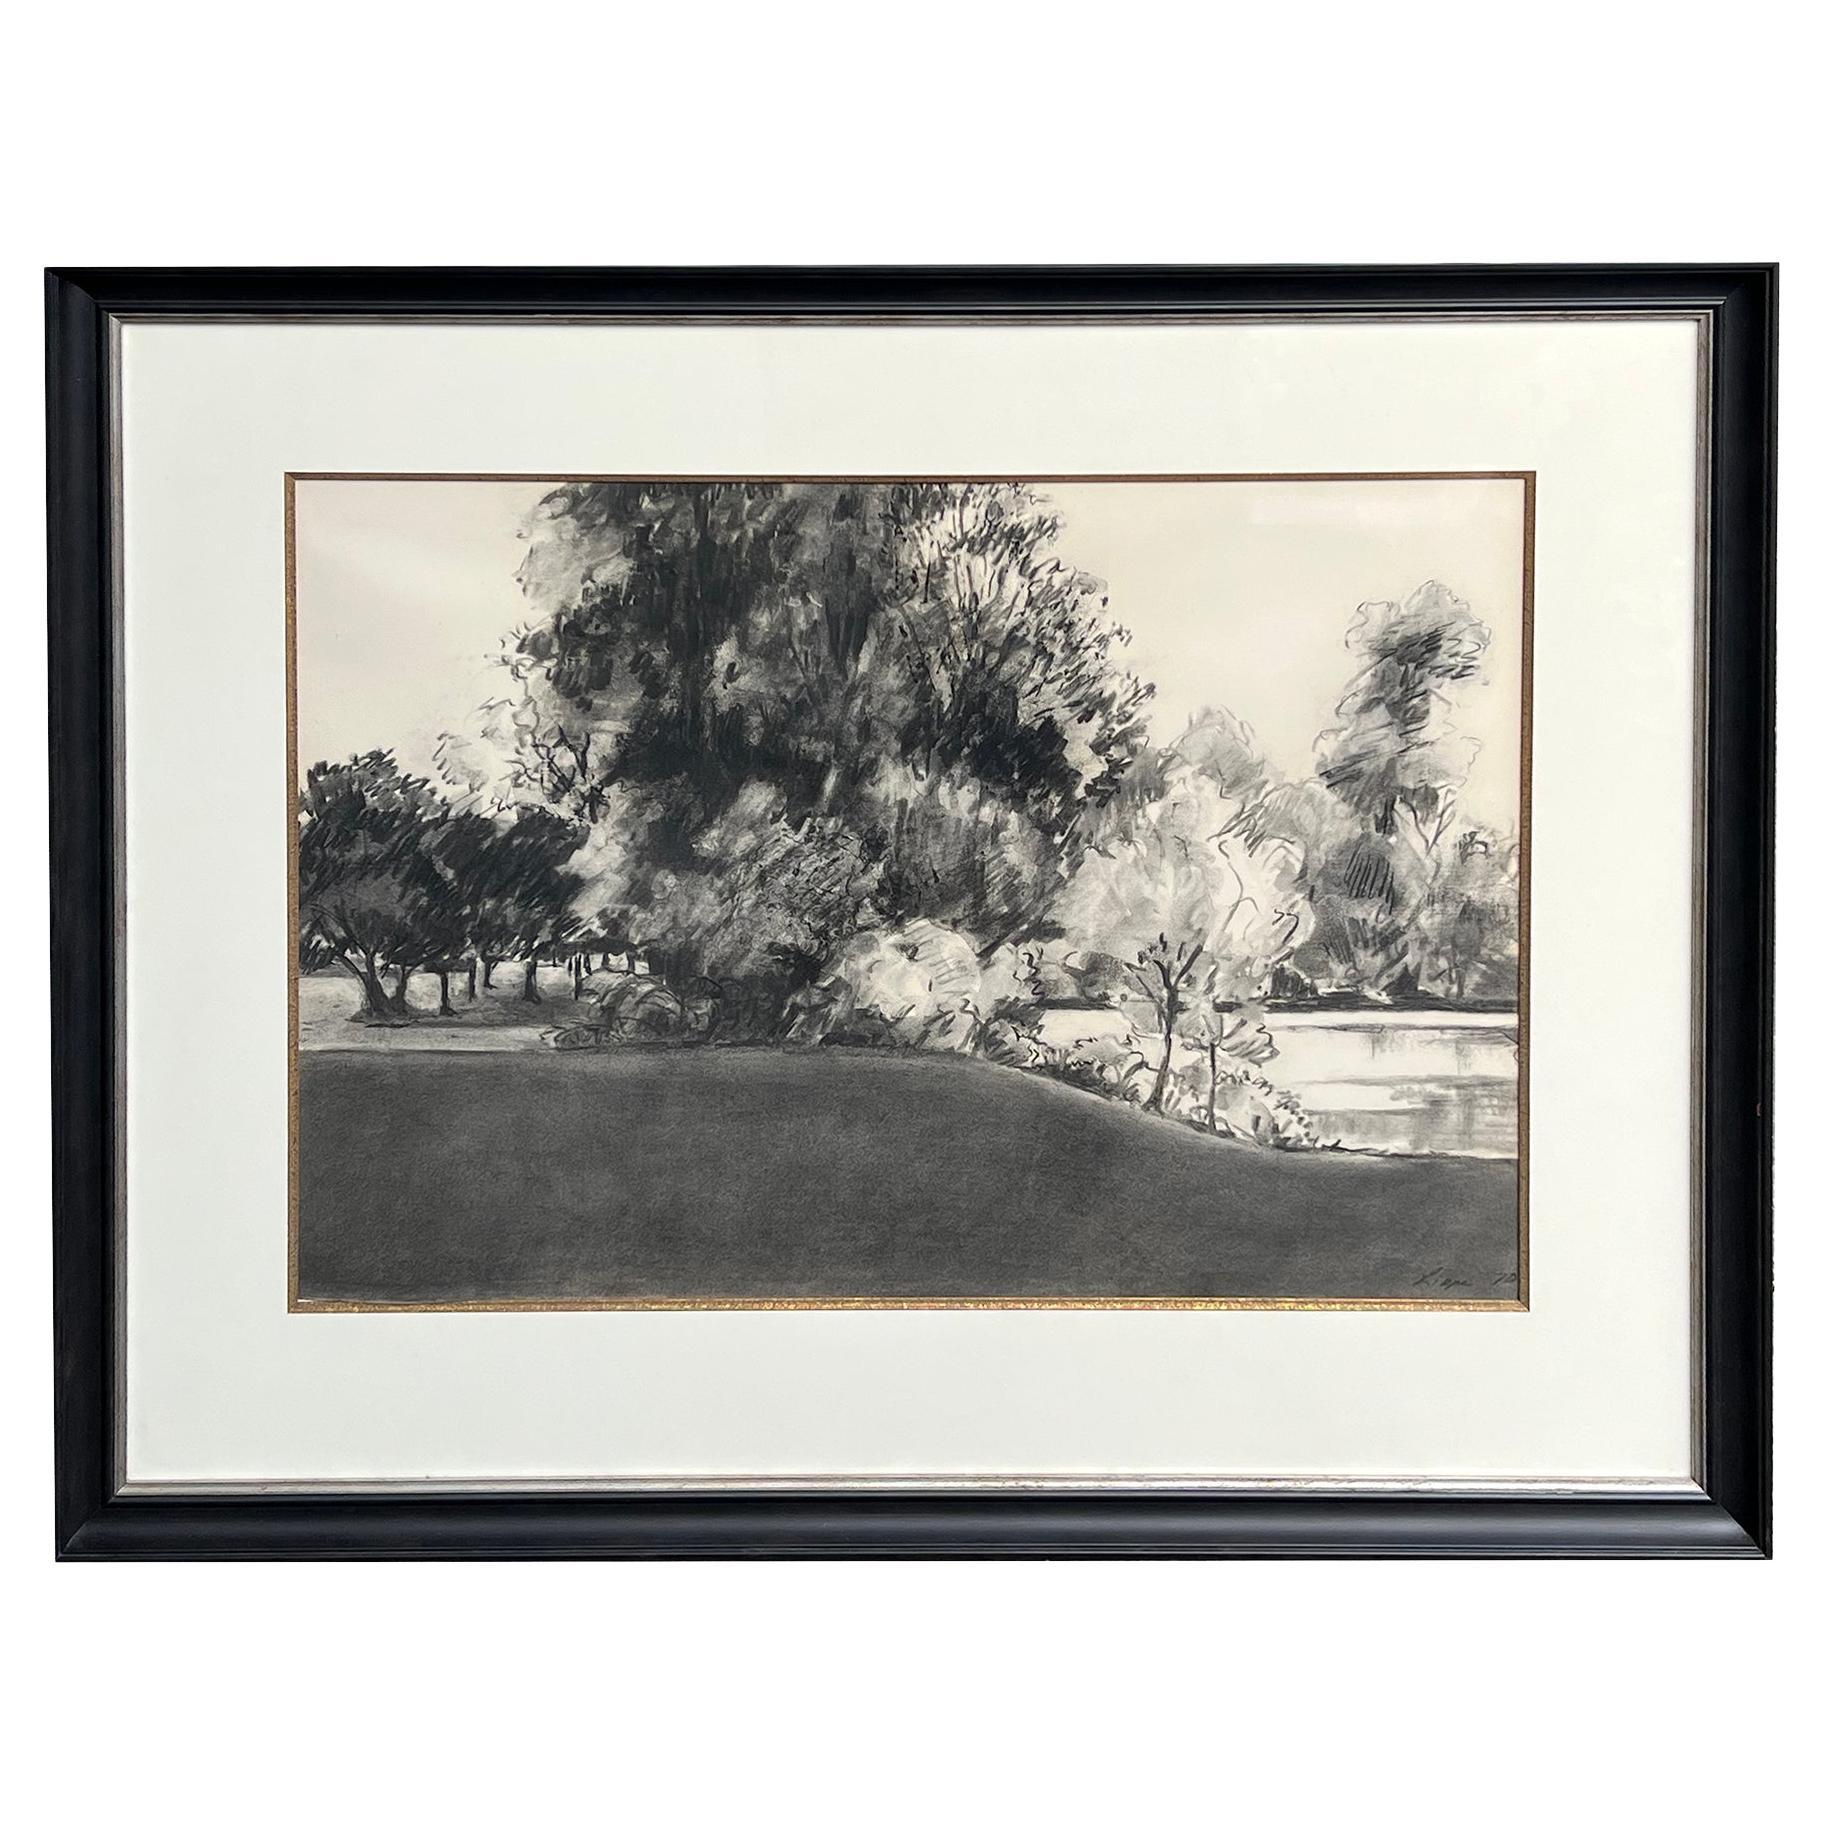 Charcoal on paper: 'The Edge of the Park' Signed 'Liepe '70' For Sale